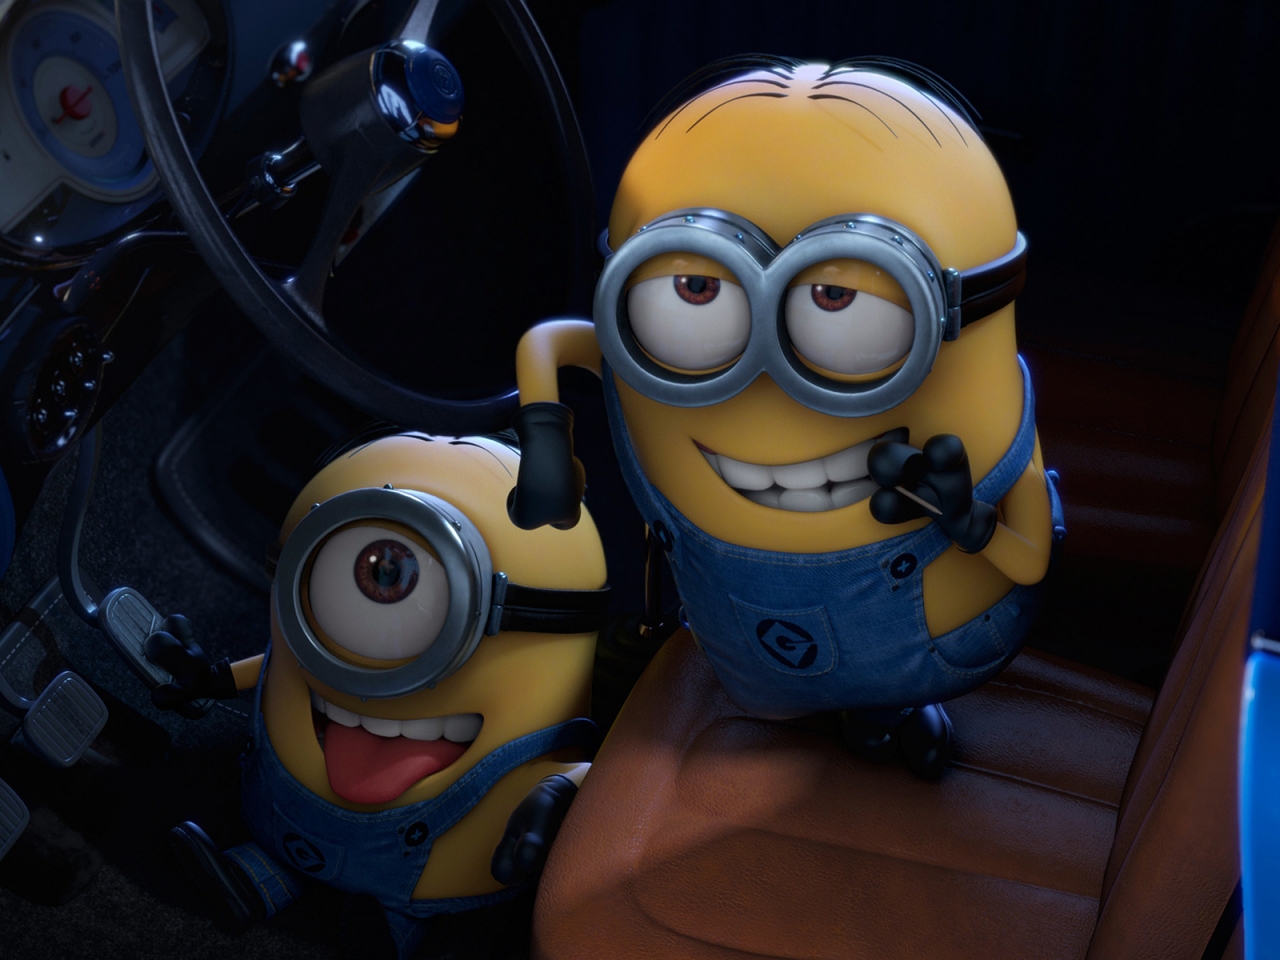 Minions for 1280 x 960 resolution